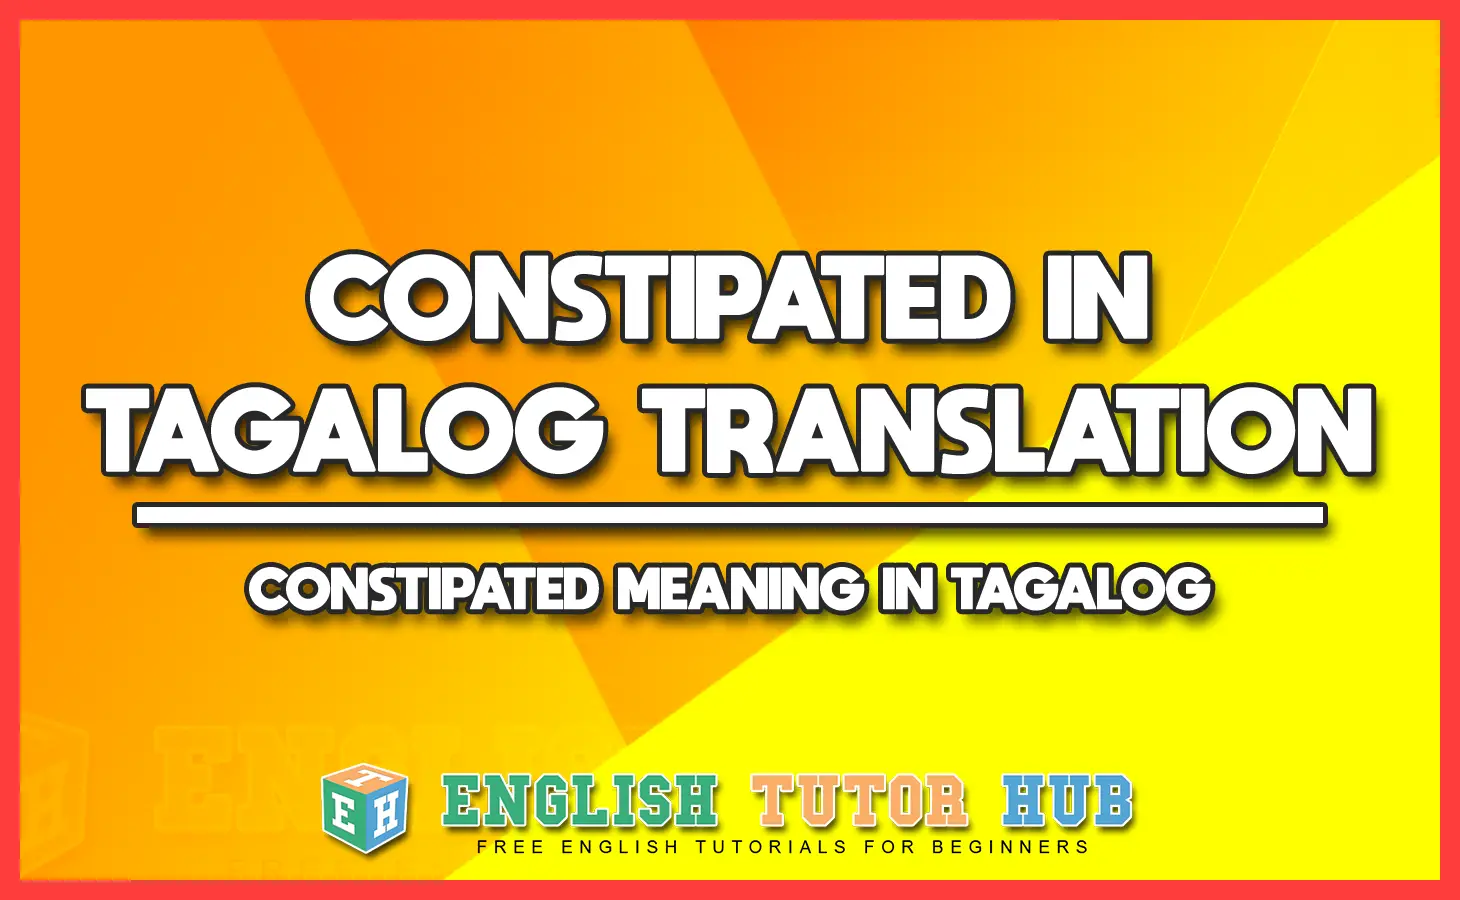 CONSTIPATED IN TAGALOG TRANSLATION - CONSTIPATED MEANING IN TAGALOG